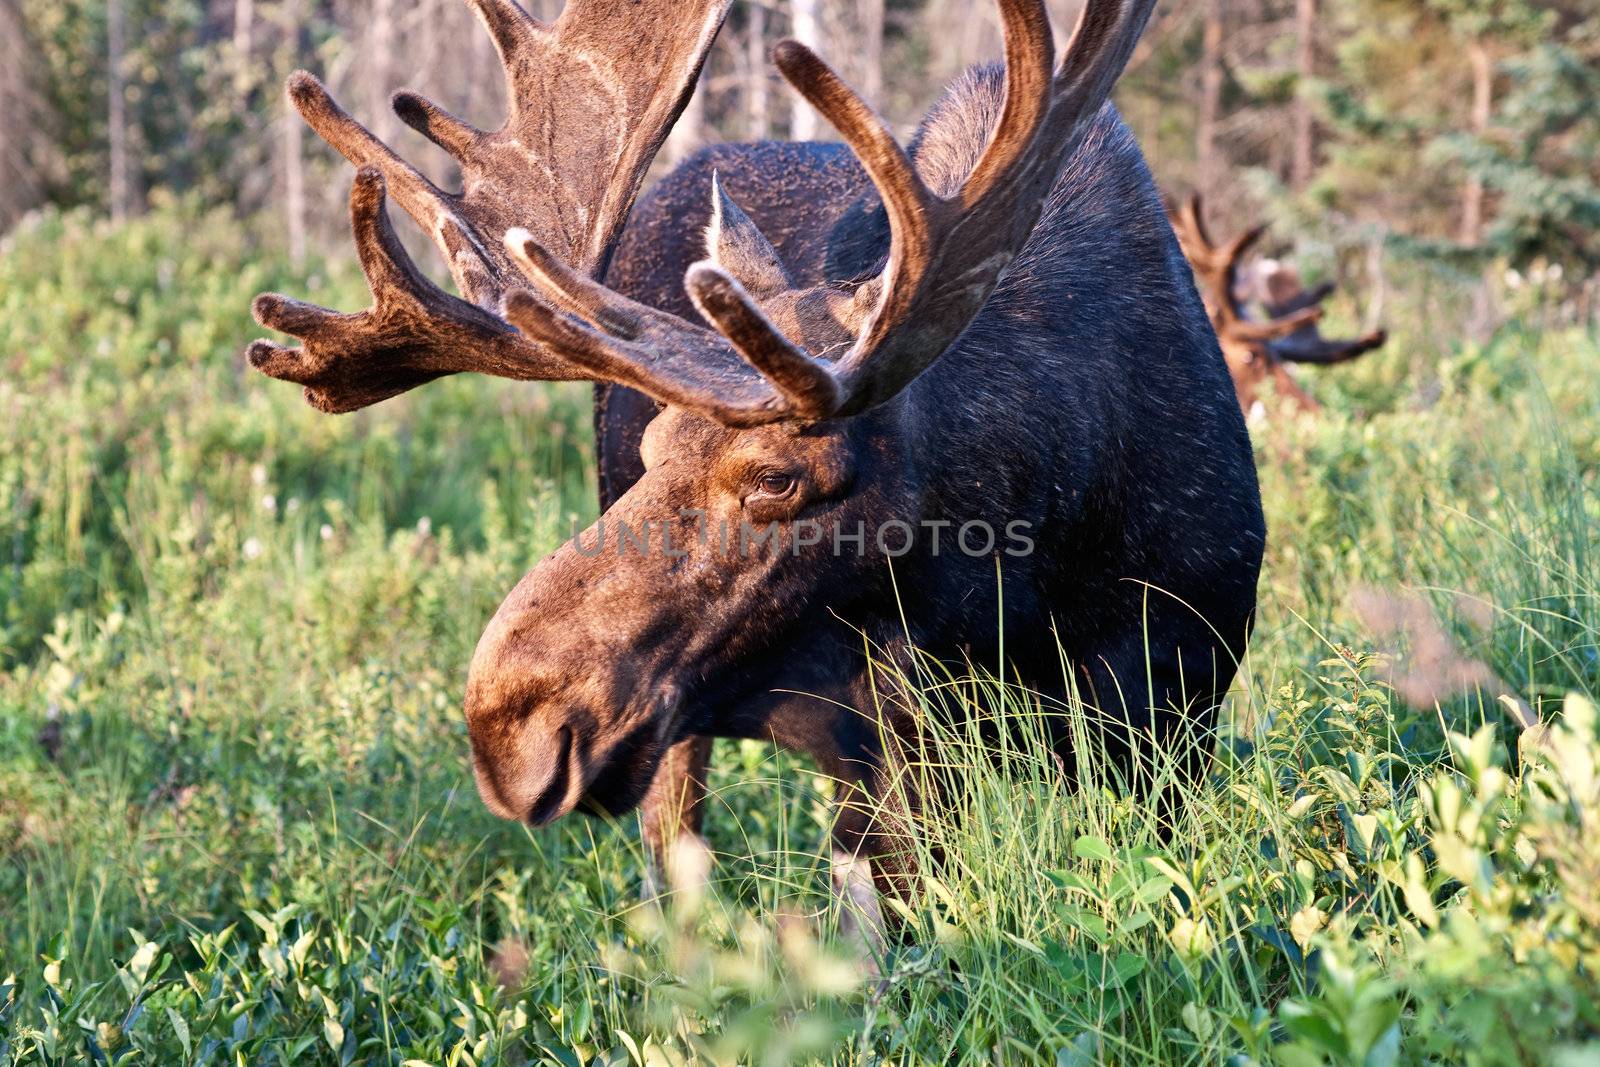 Bull moose image by Marcus